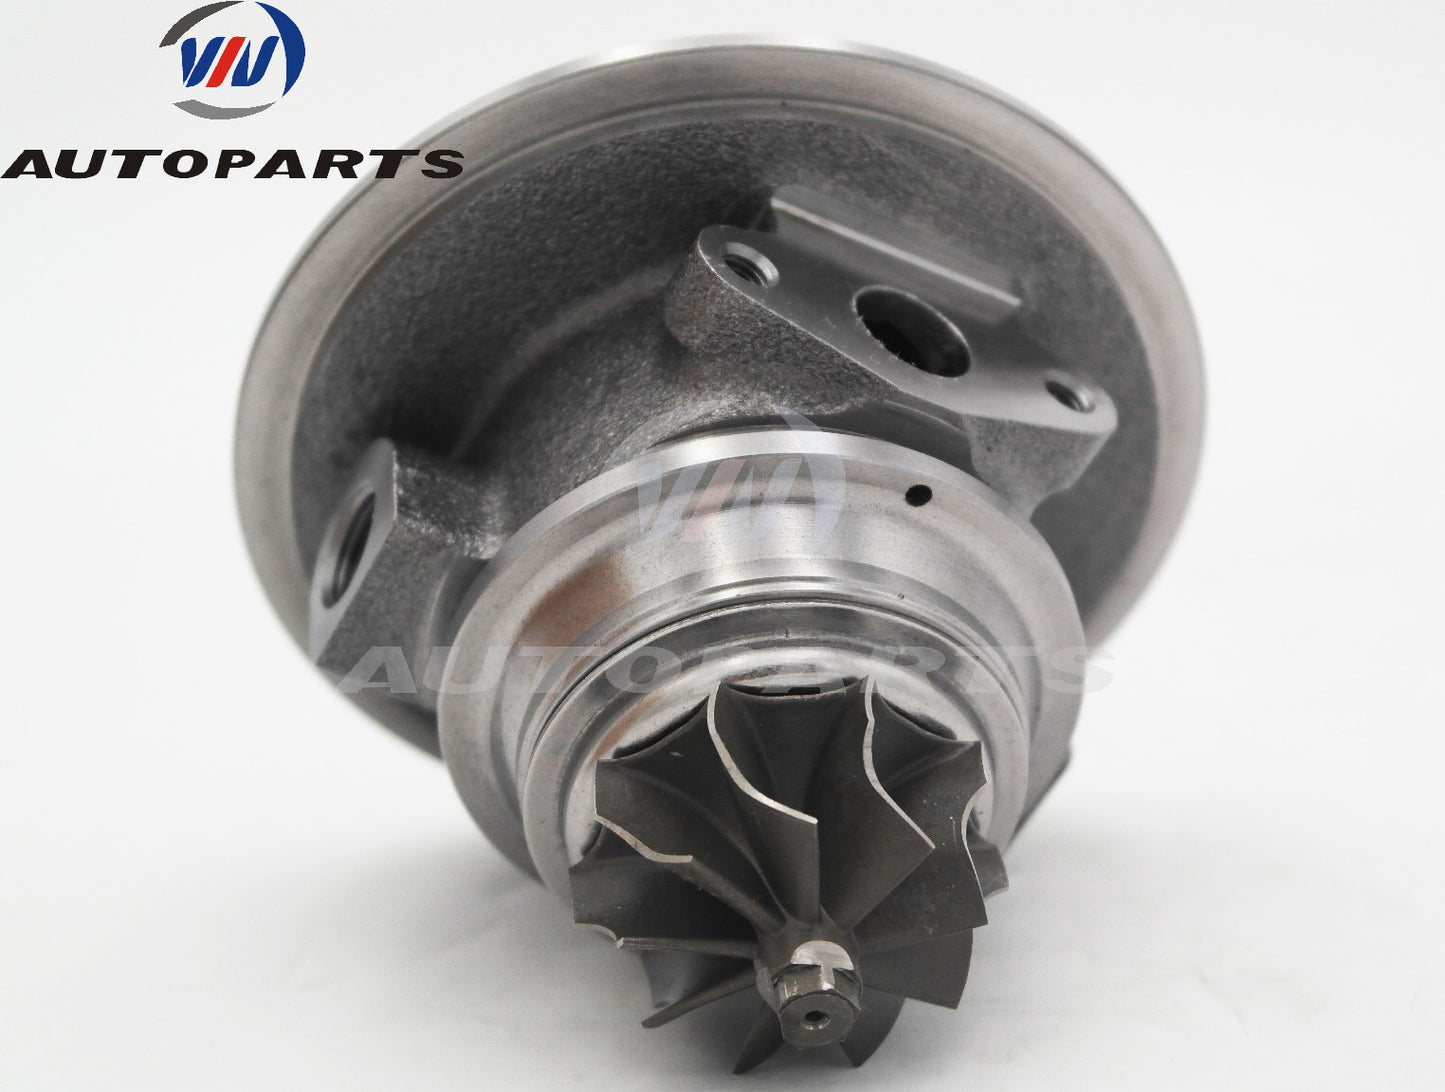 CHRA VBX40085 for Turbocharger VB420088 for Mitsubishi L200, W200 with 2.5L Diesel Engine